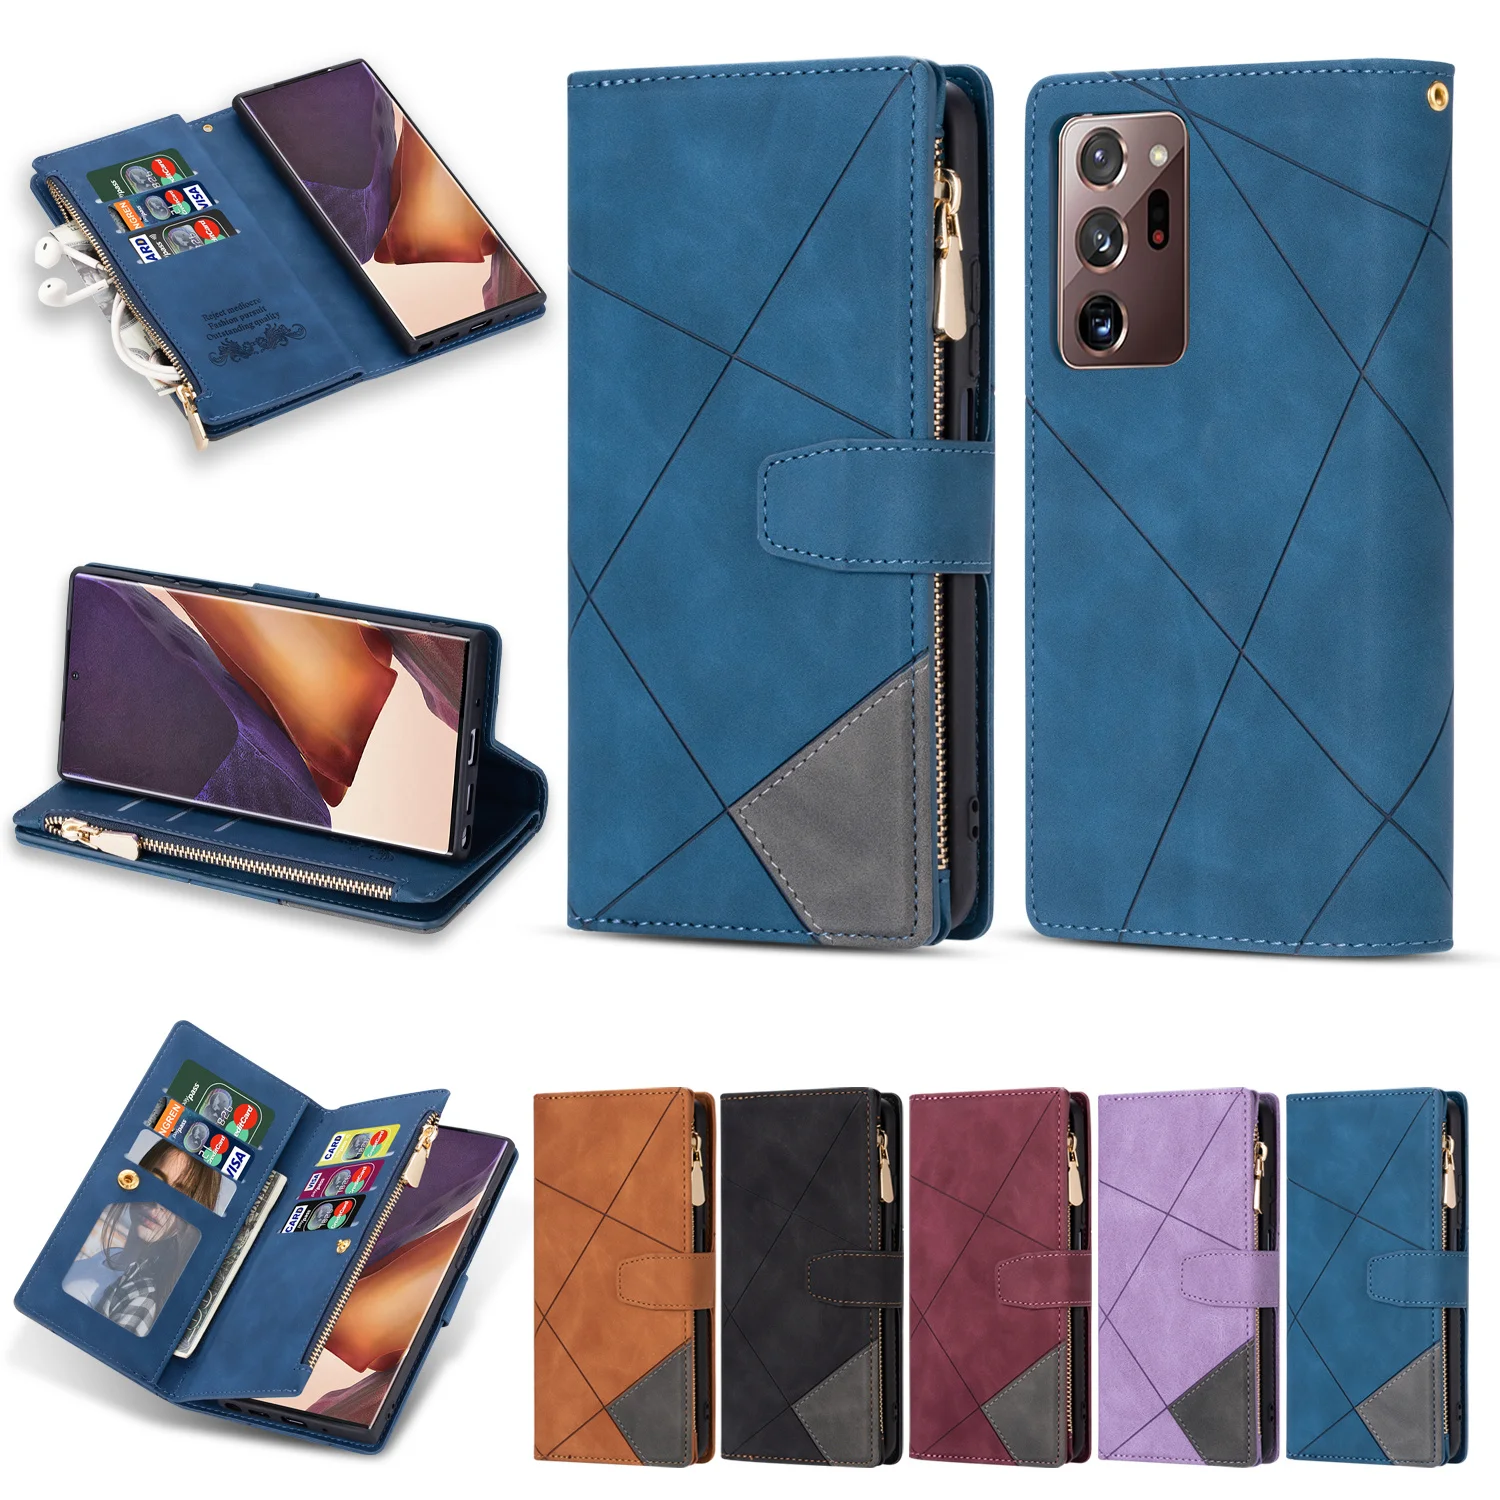 

Card Holder Wallet Case for Samsung Note20 Note10 Plus Note9 Note8 A10 A20 A30 A50 A70 M10 Anti-Fingerprint Leather Flip Covers